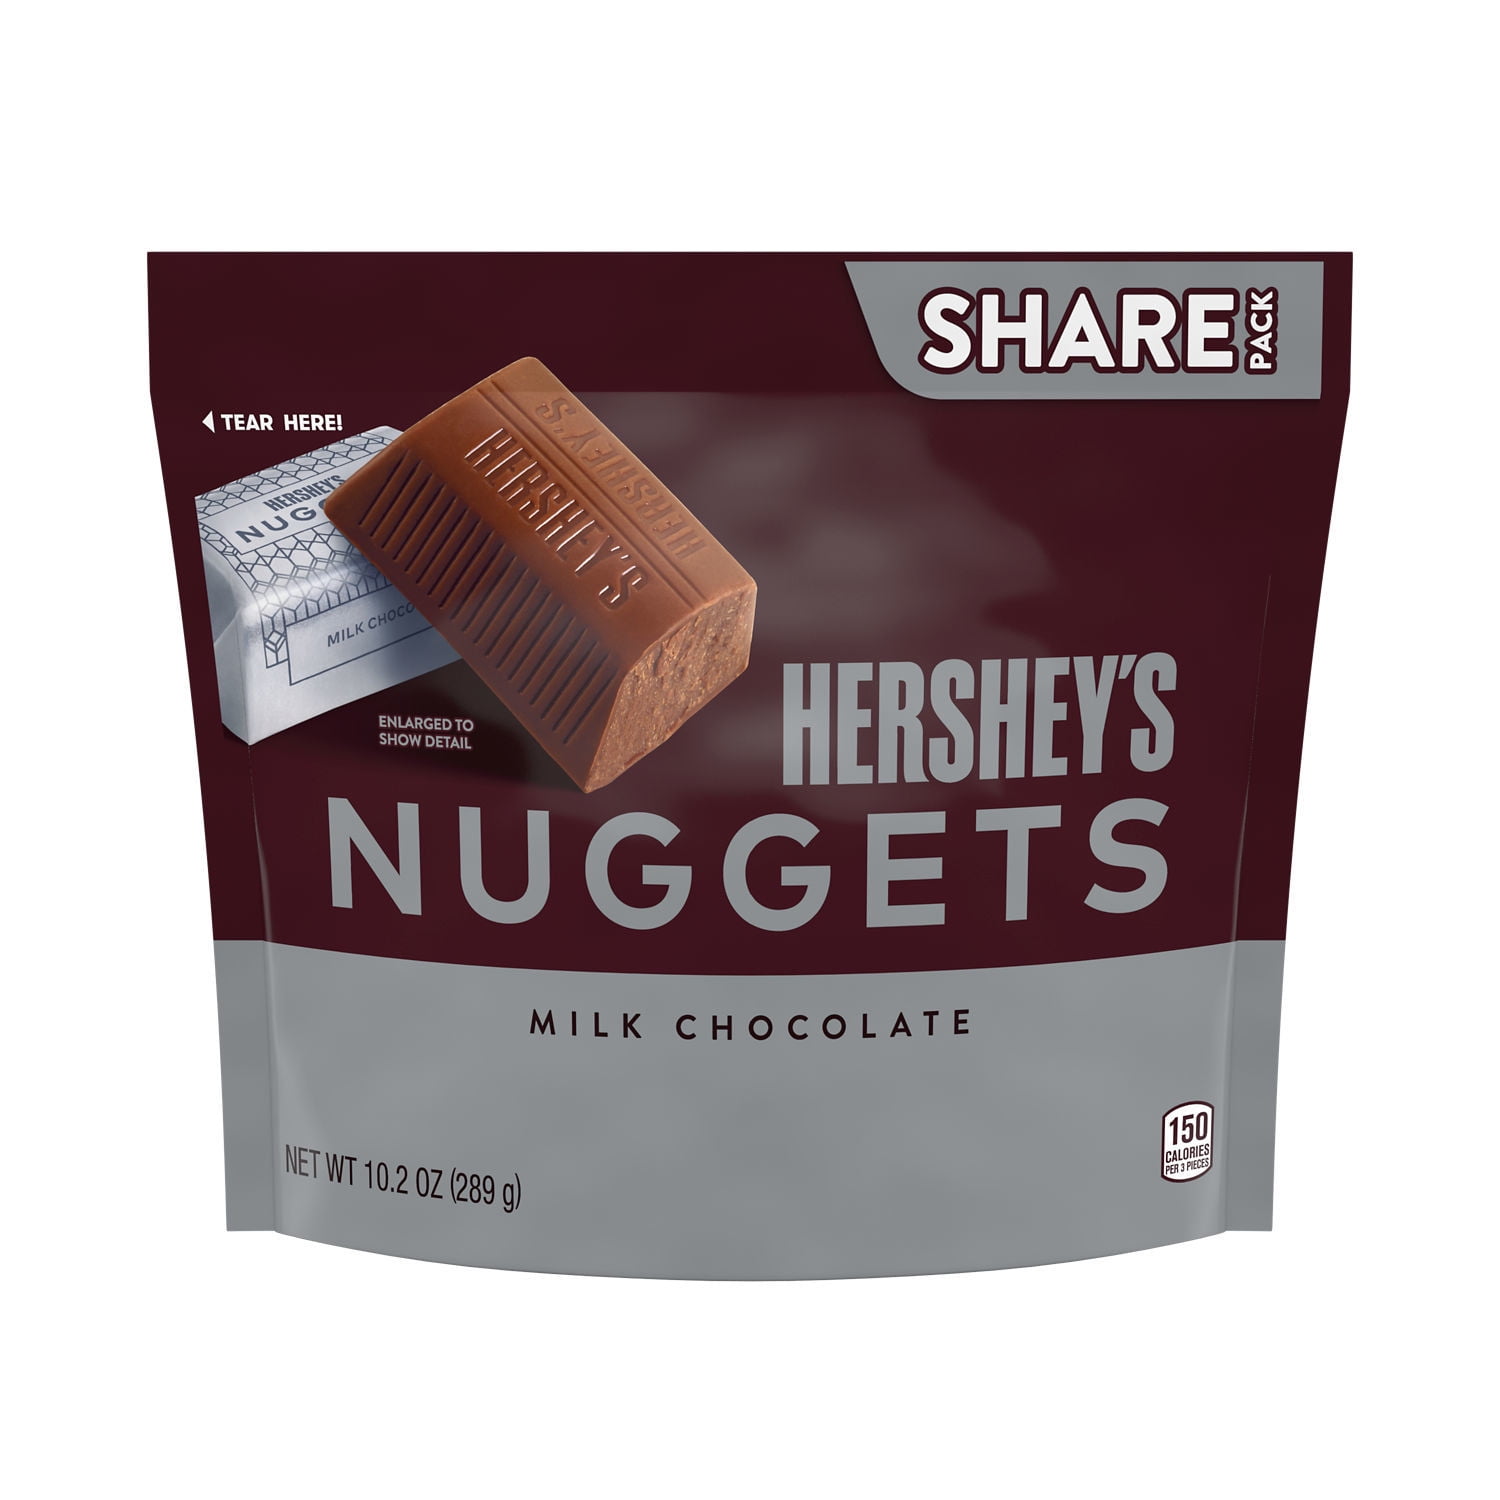 HERSHEY'S NUGGETS Milk Chocolate Silver Foil, Easter Candy Share Pack, 10.2 oz